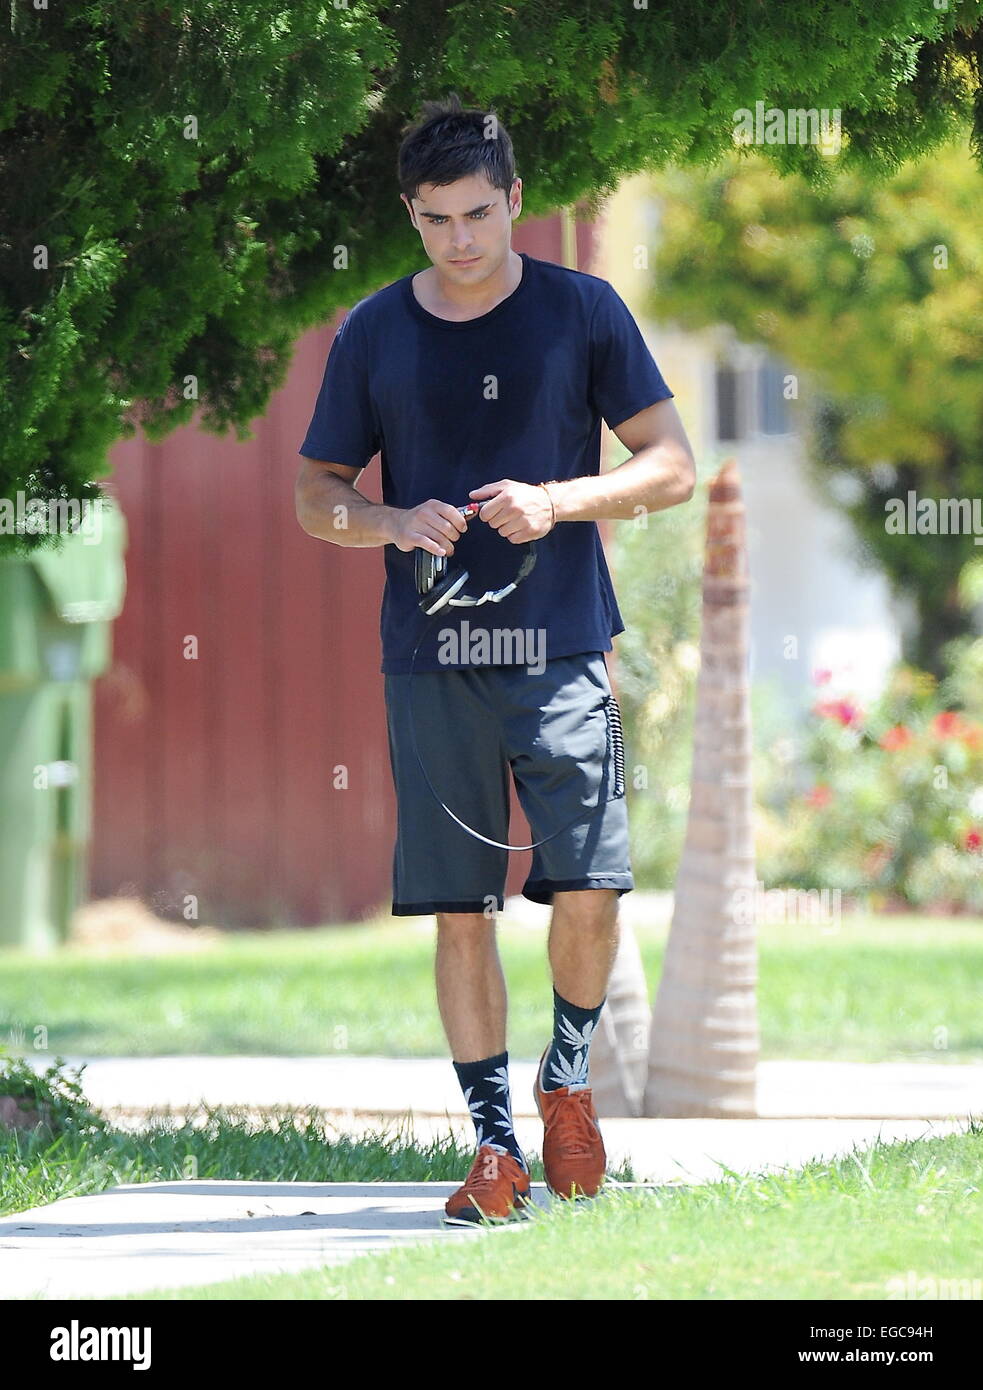 Zac Efron shows off his biceps as he continues filming for his new movie 'We Are Your Friends' in Northridge, California Featuring: Zac Efron Where: Northridge, California, United States When: 20 Aug 2014 Stock Photo